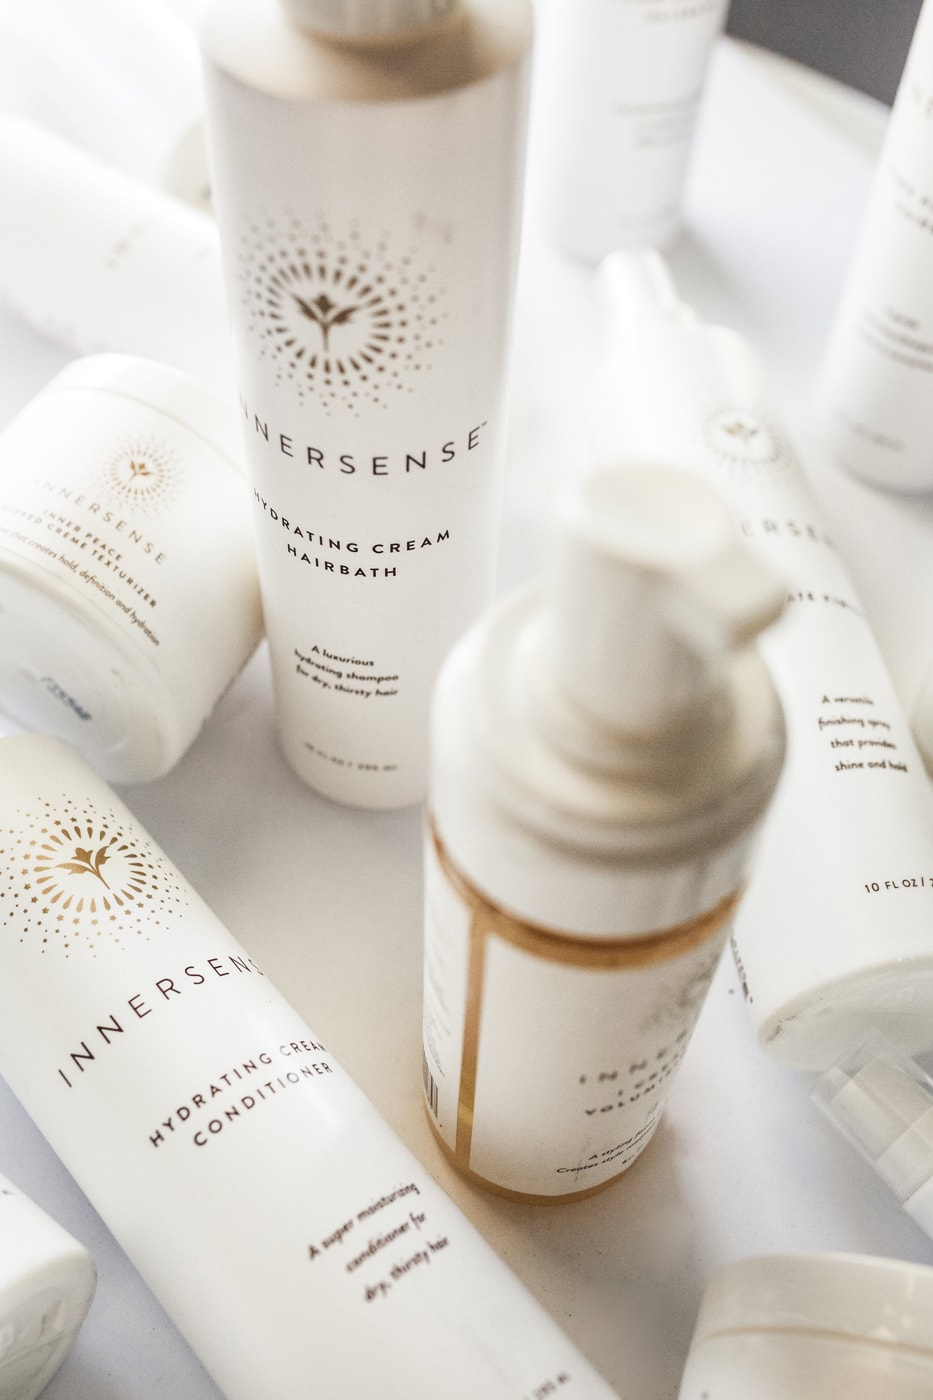 Innersense Organic Beauty Launches New Clarity Collection